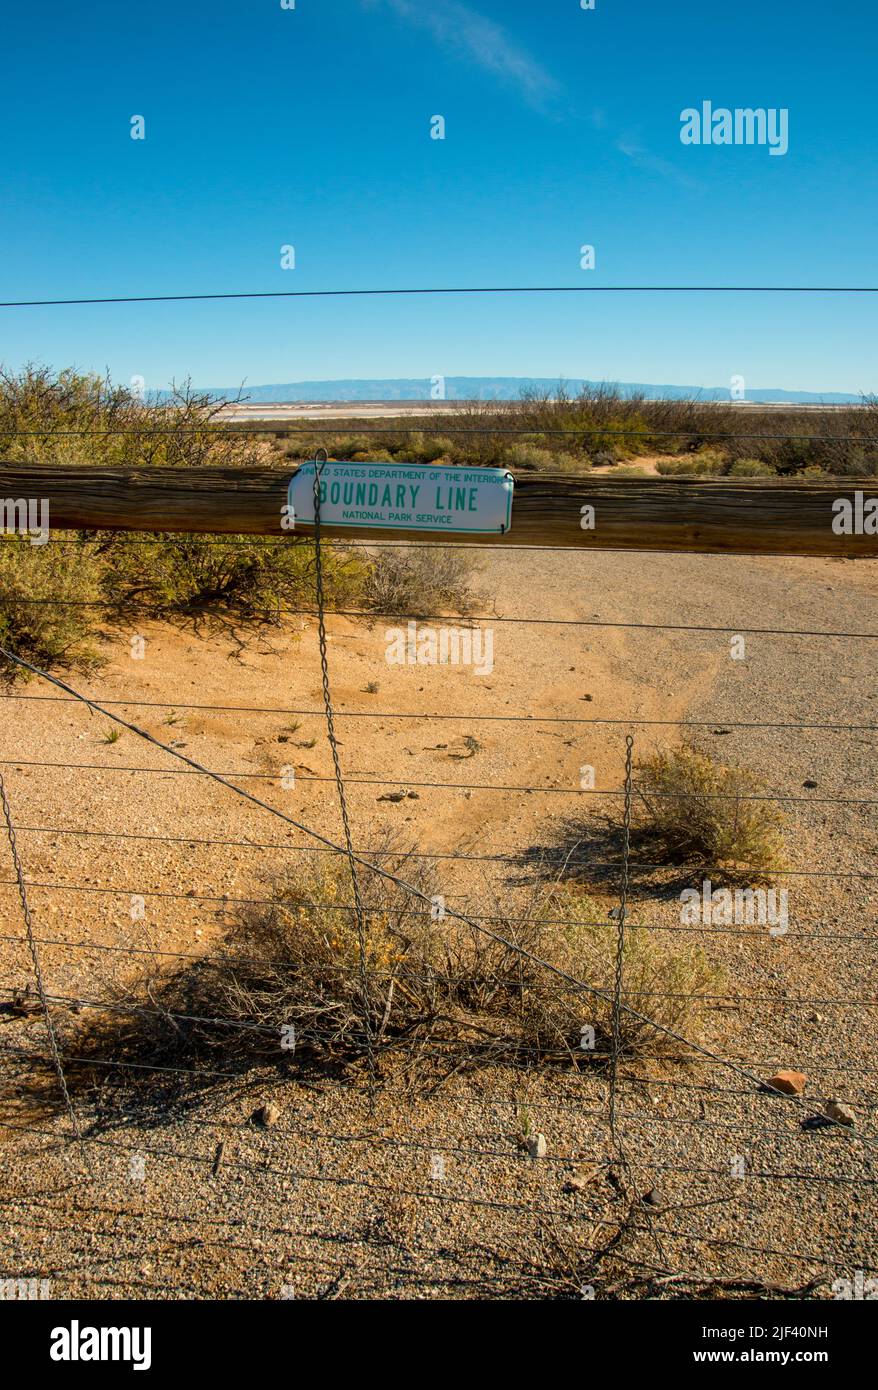 USA, NEW MEXICO - NOVEMBER 23, 2019: 'Boundary Line' sign on an old park fence in New Mexico Stock Photo